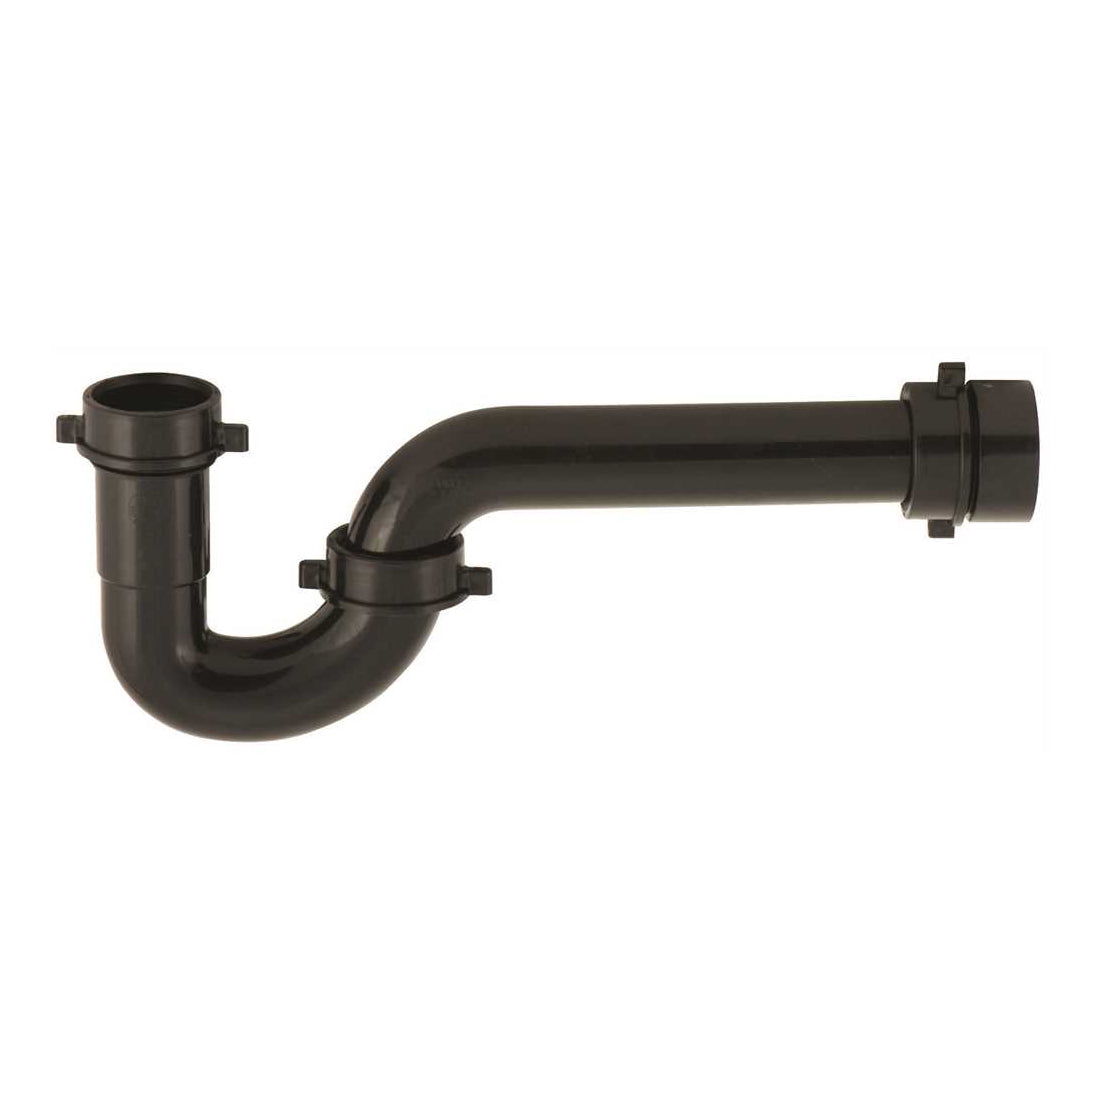 400B - 1-1/2" P-Trap with Reducing Washer and Sch 40 Marvel Connection - Black